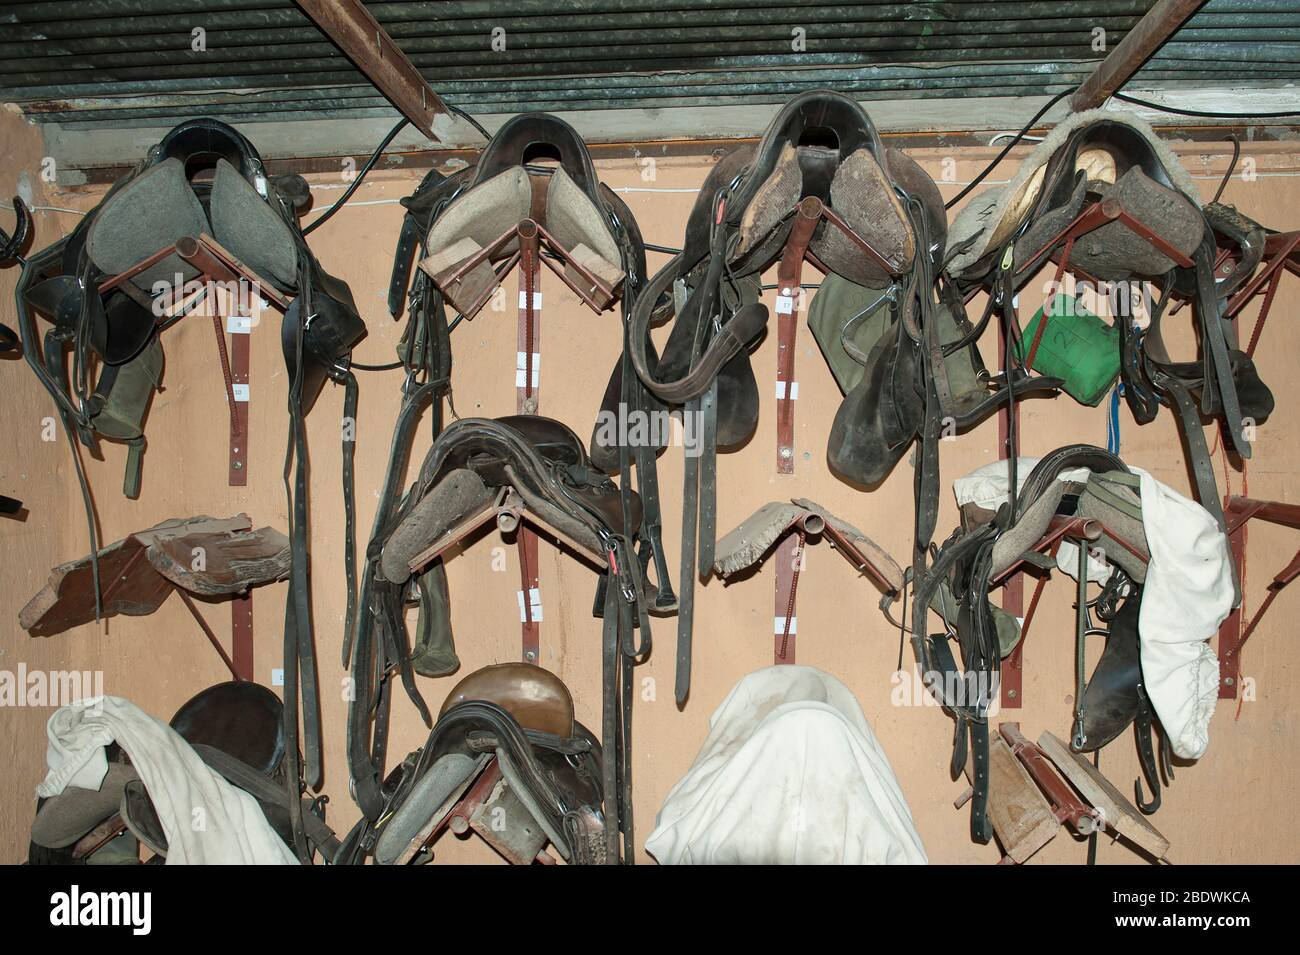 Stable and horseriding equipment, saddles and stirrups, in stables, Ant's Hill Reserve, near Vaalwater, Limpopo province, South Africa Stock Photo